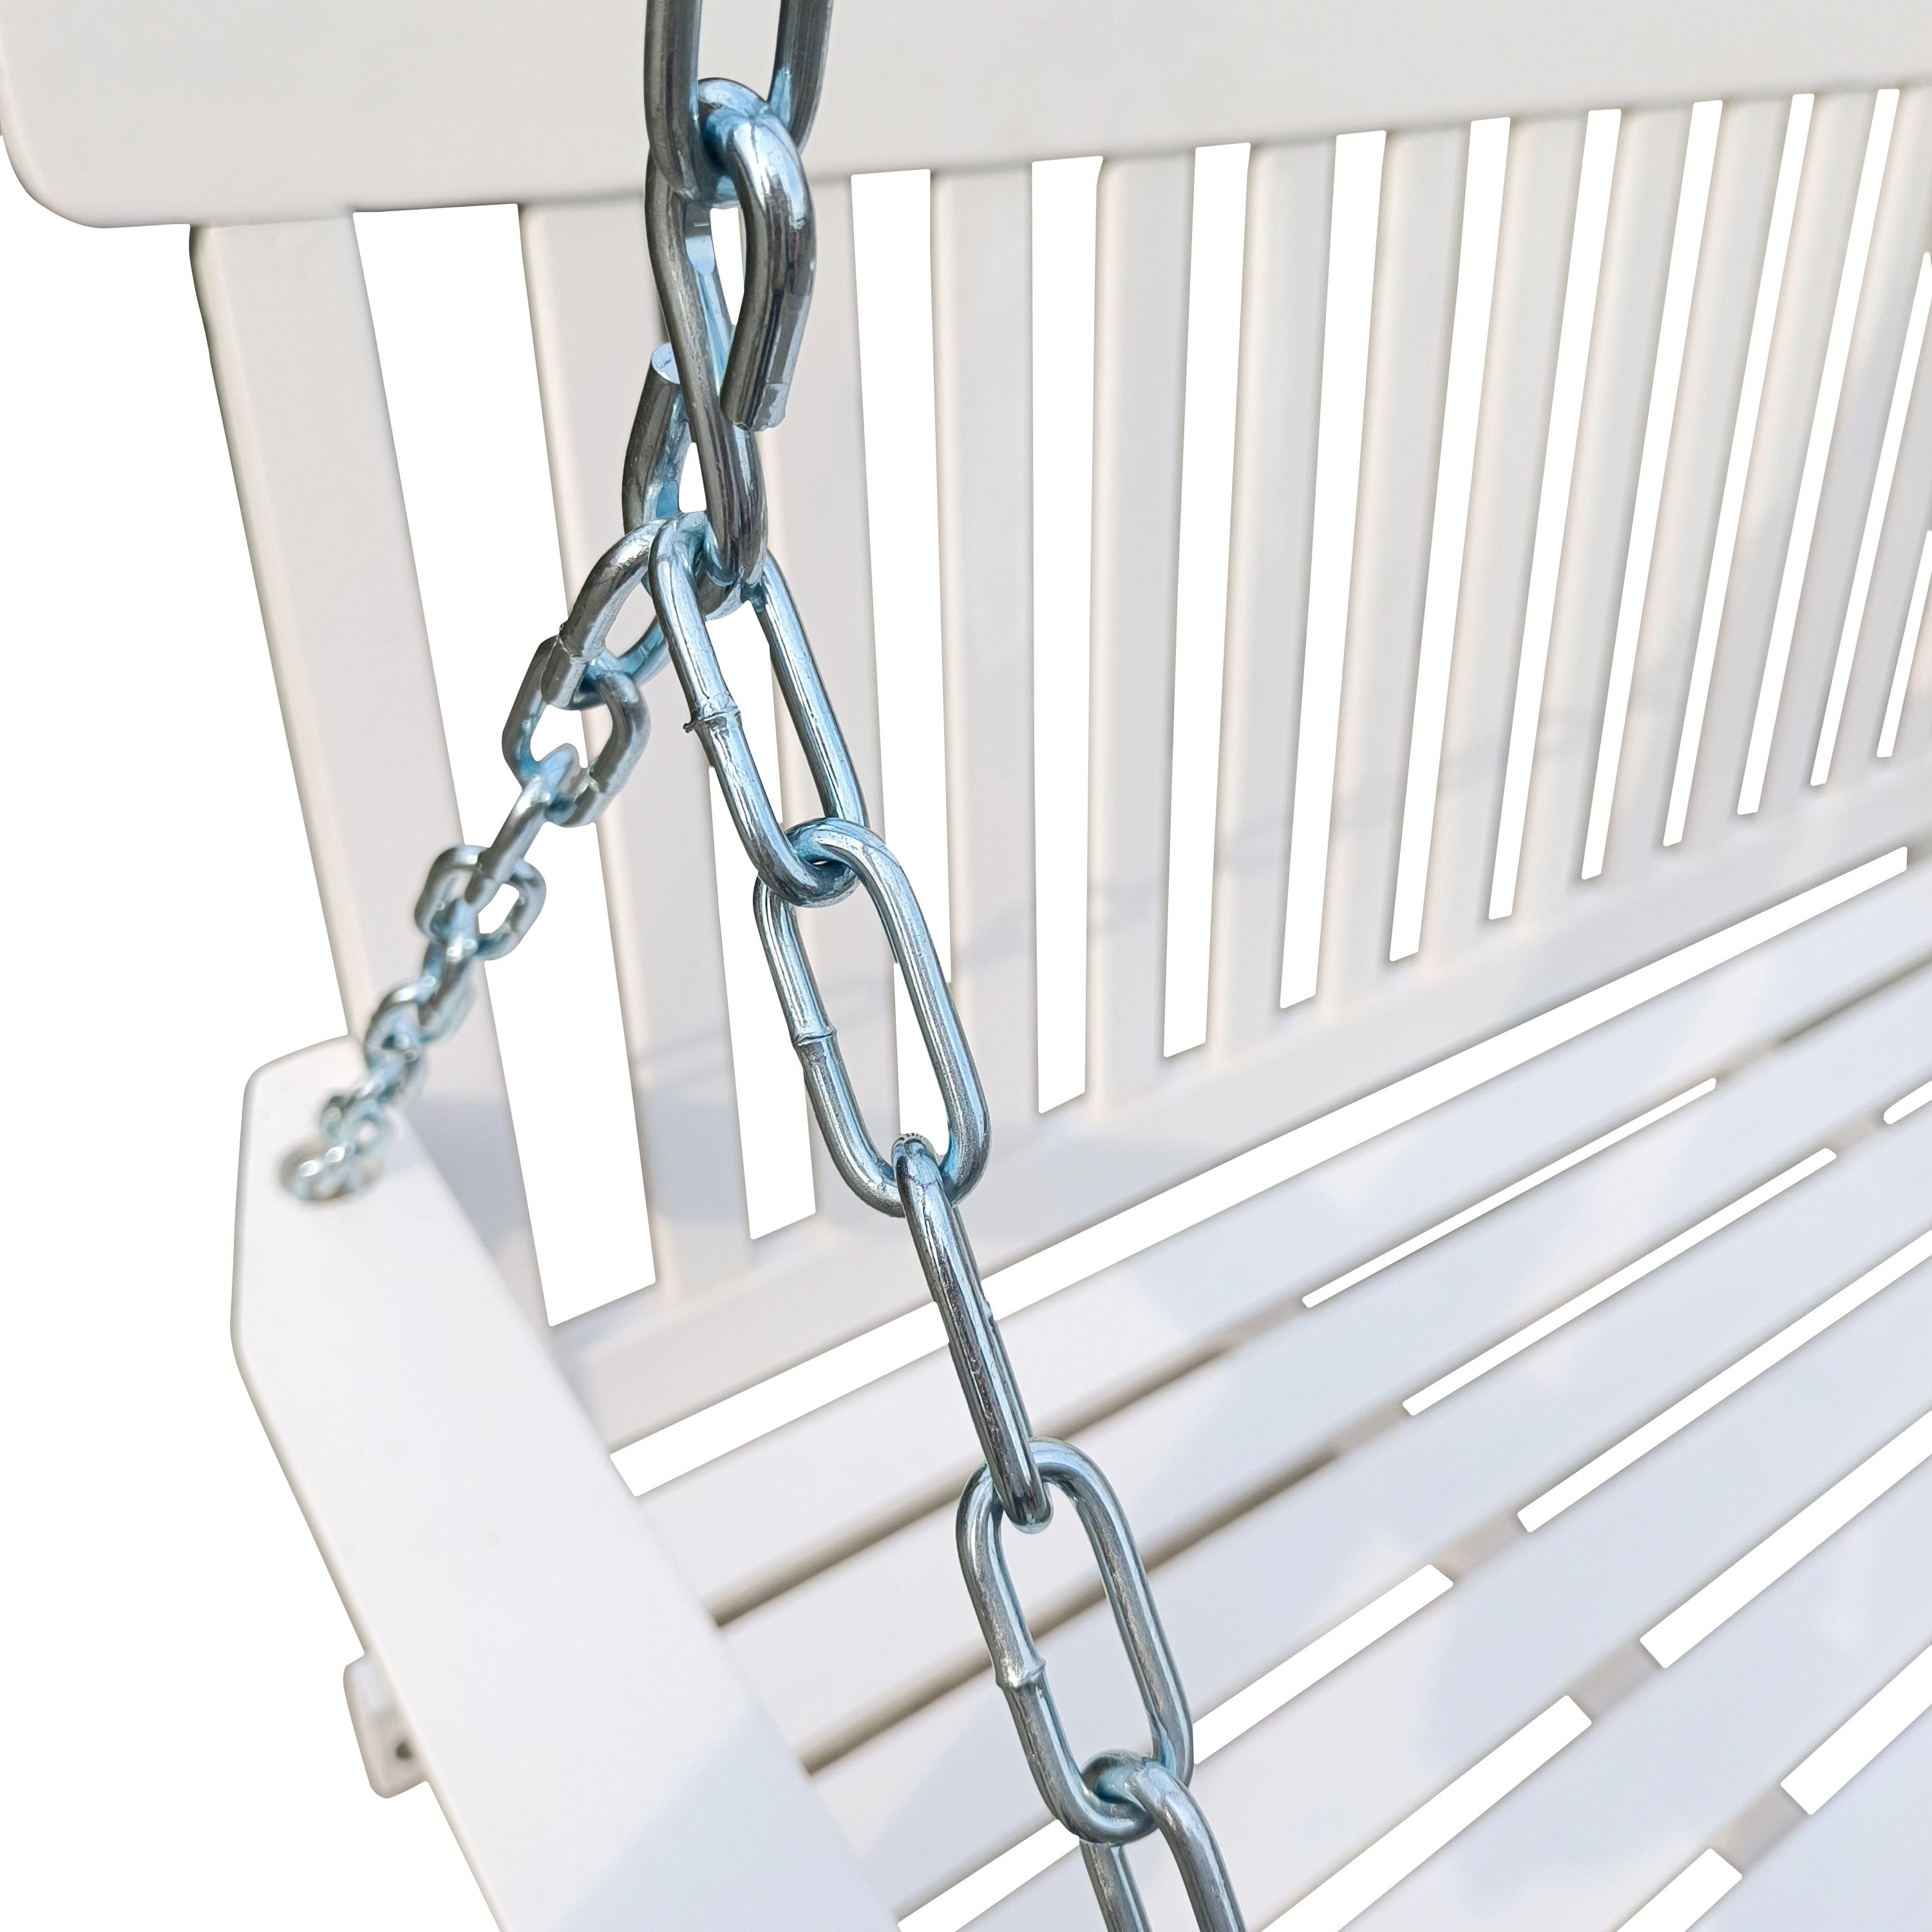 Front Porch Swing with Armrests, Wood Bench Swing with Hanging Chains,for Outdoor Patio ,Garden Yard, porch, backyard,  or sunroom,Easy to Assemble,white